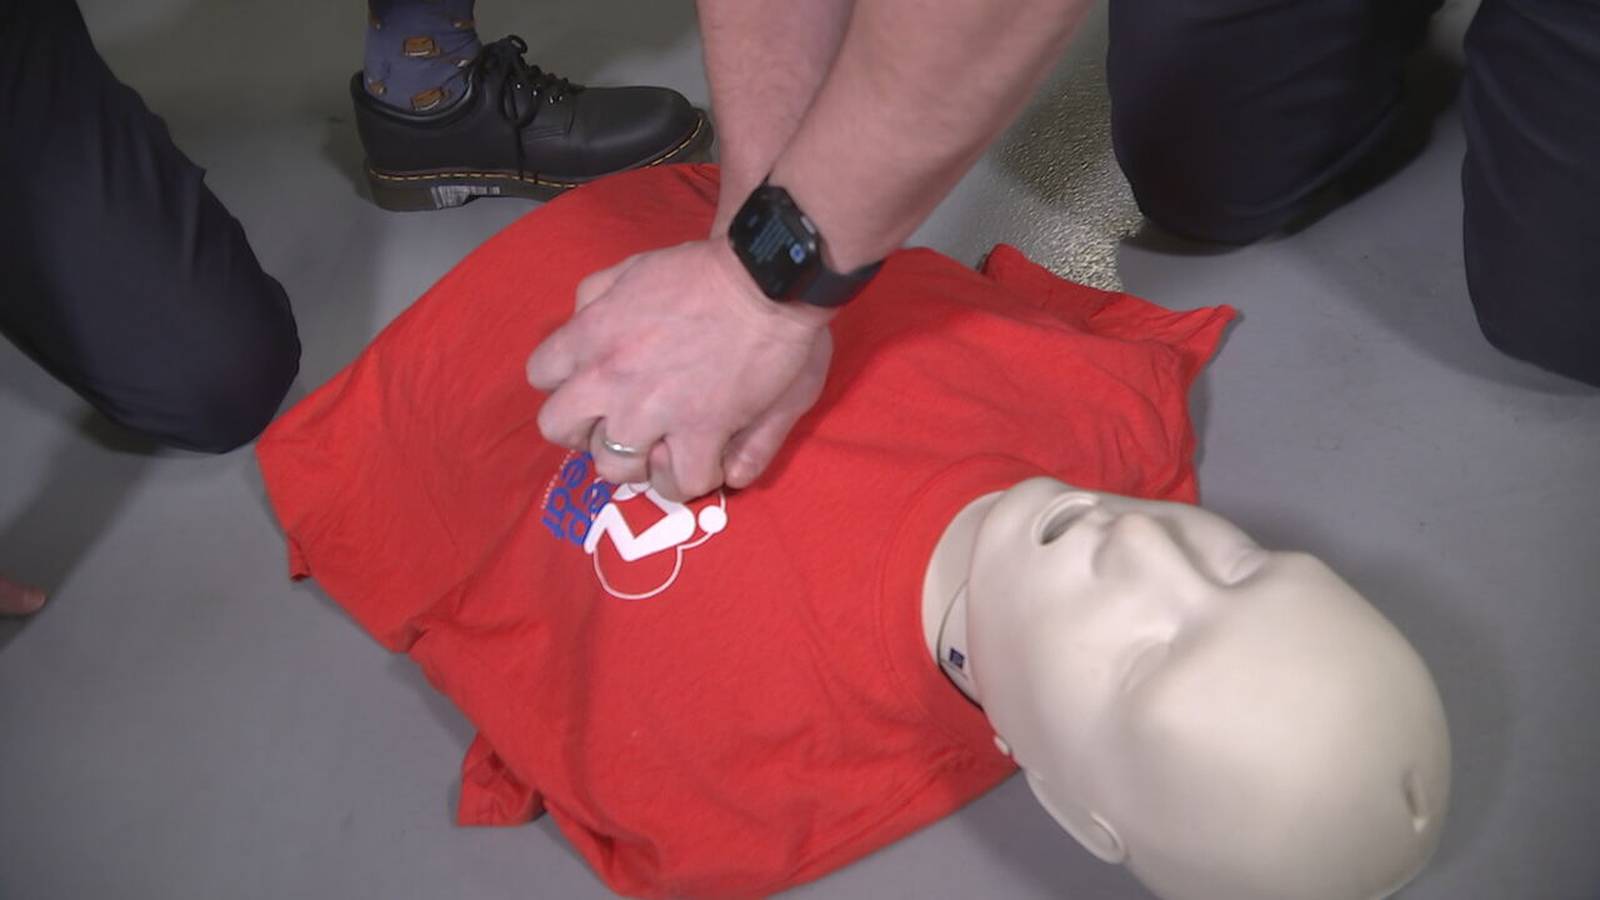 Medic Offers Non Certified Cpr And Aed Training Class After Damar Hamlins Cardiac Incident Wsoc Tv